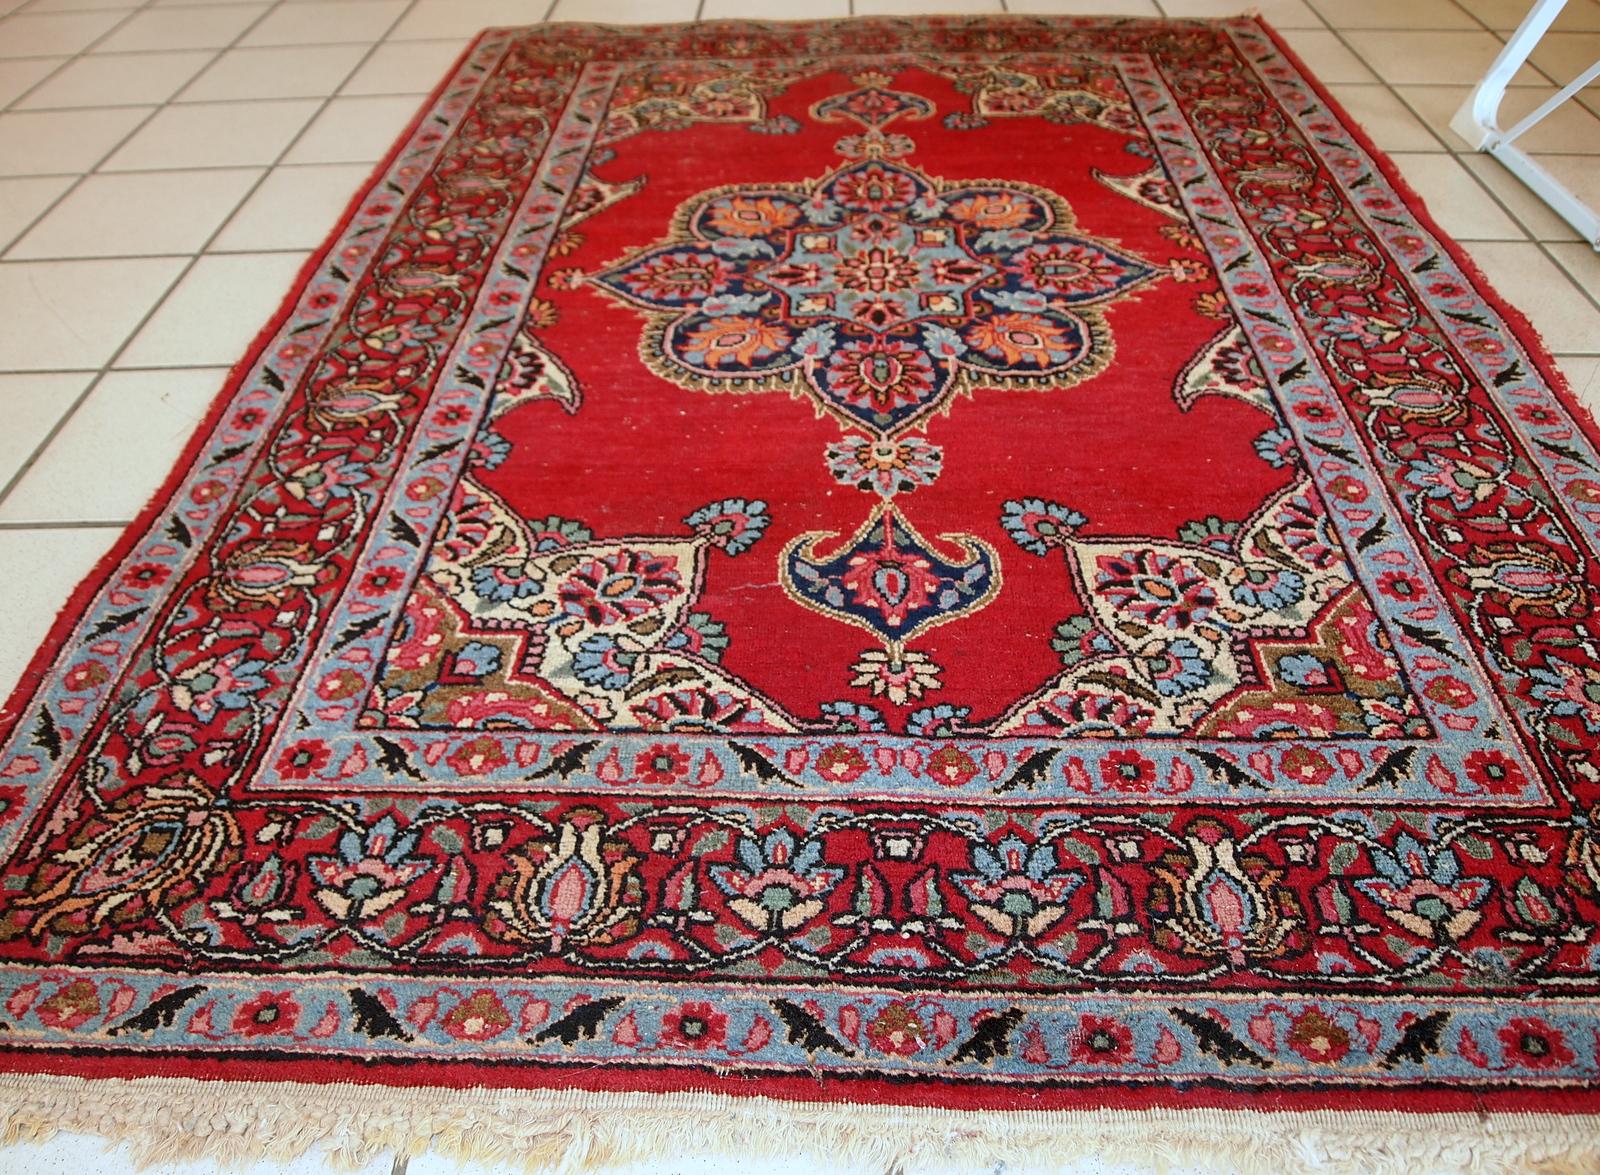 Vintage Kazvin style rug in bright red color. The rug is from the end of 20th century. It is in original condition, has some low pile.

- Condition: original, some low pile,

- circa 1970s,

- Size: 3.3' x 4.7' (100cm x 144cm),

- Material: